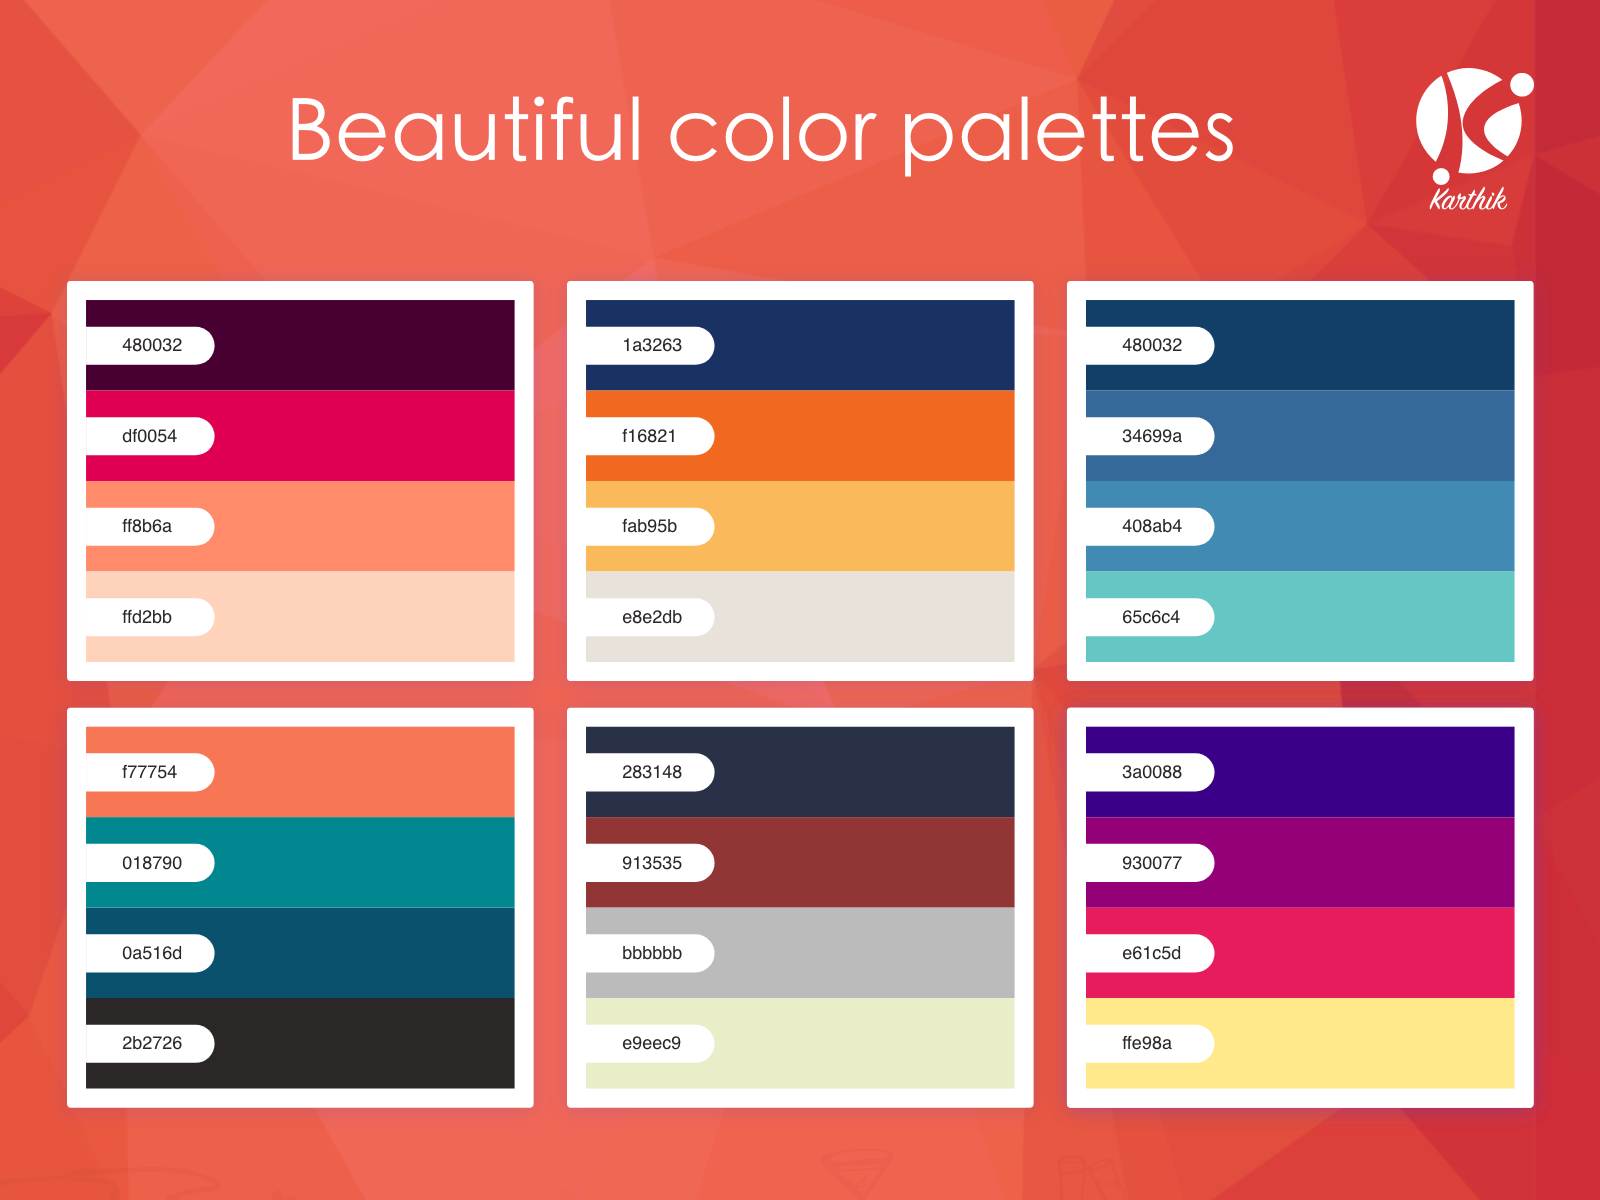 Beautiful Color Palettes by Karthikeyan M on Dribbble